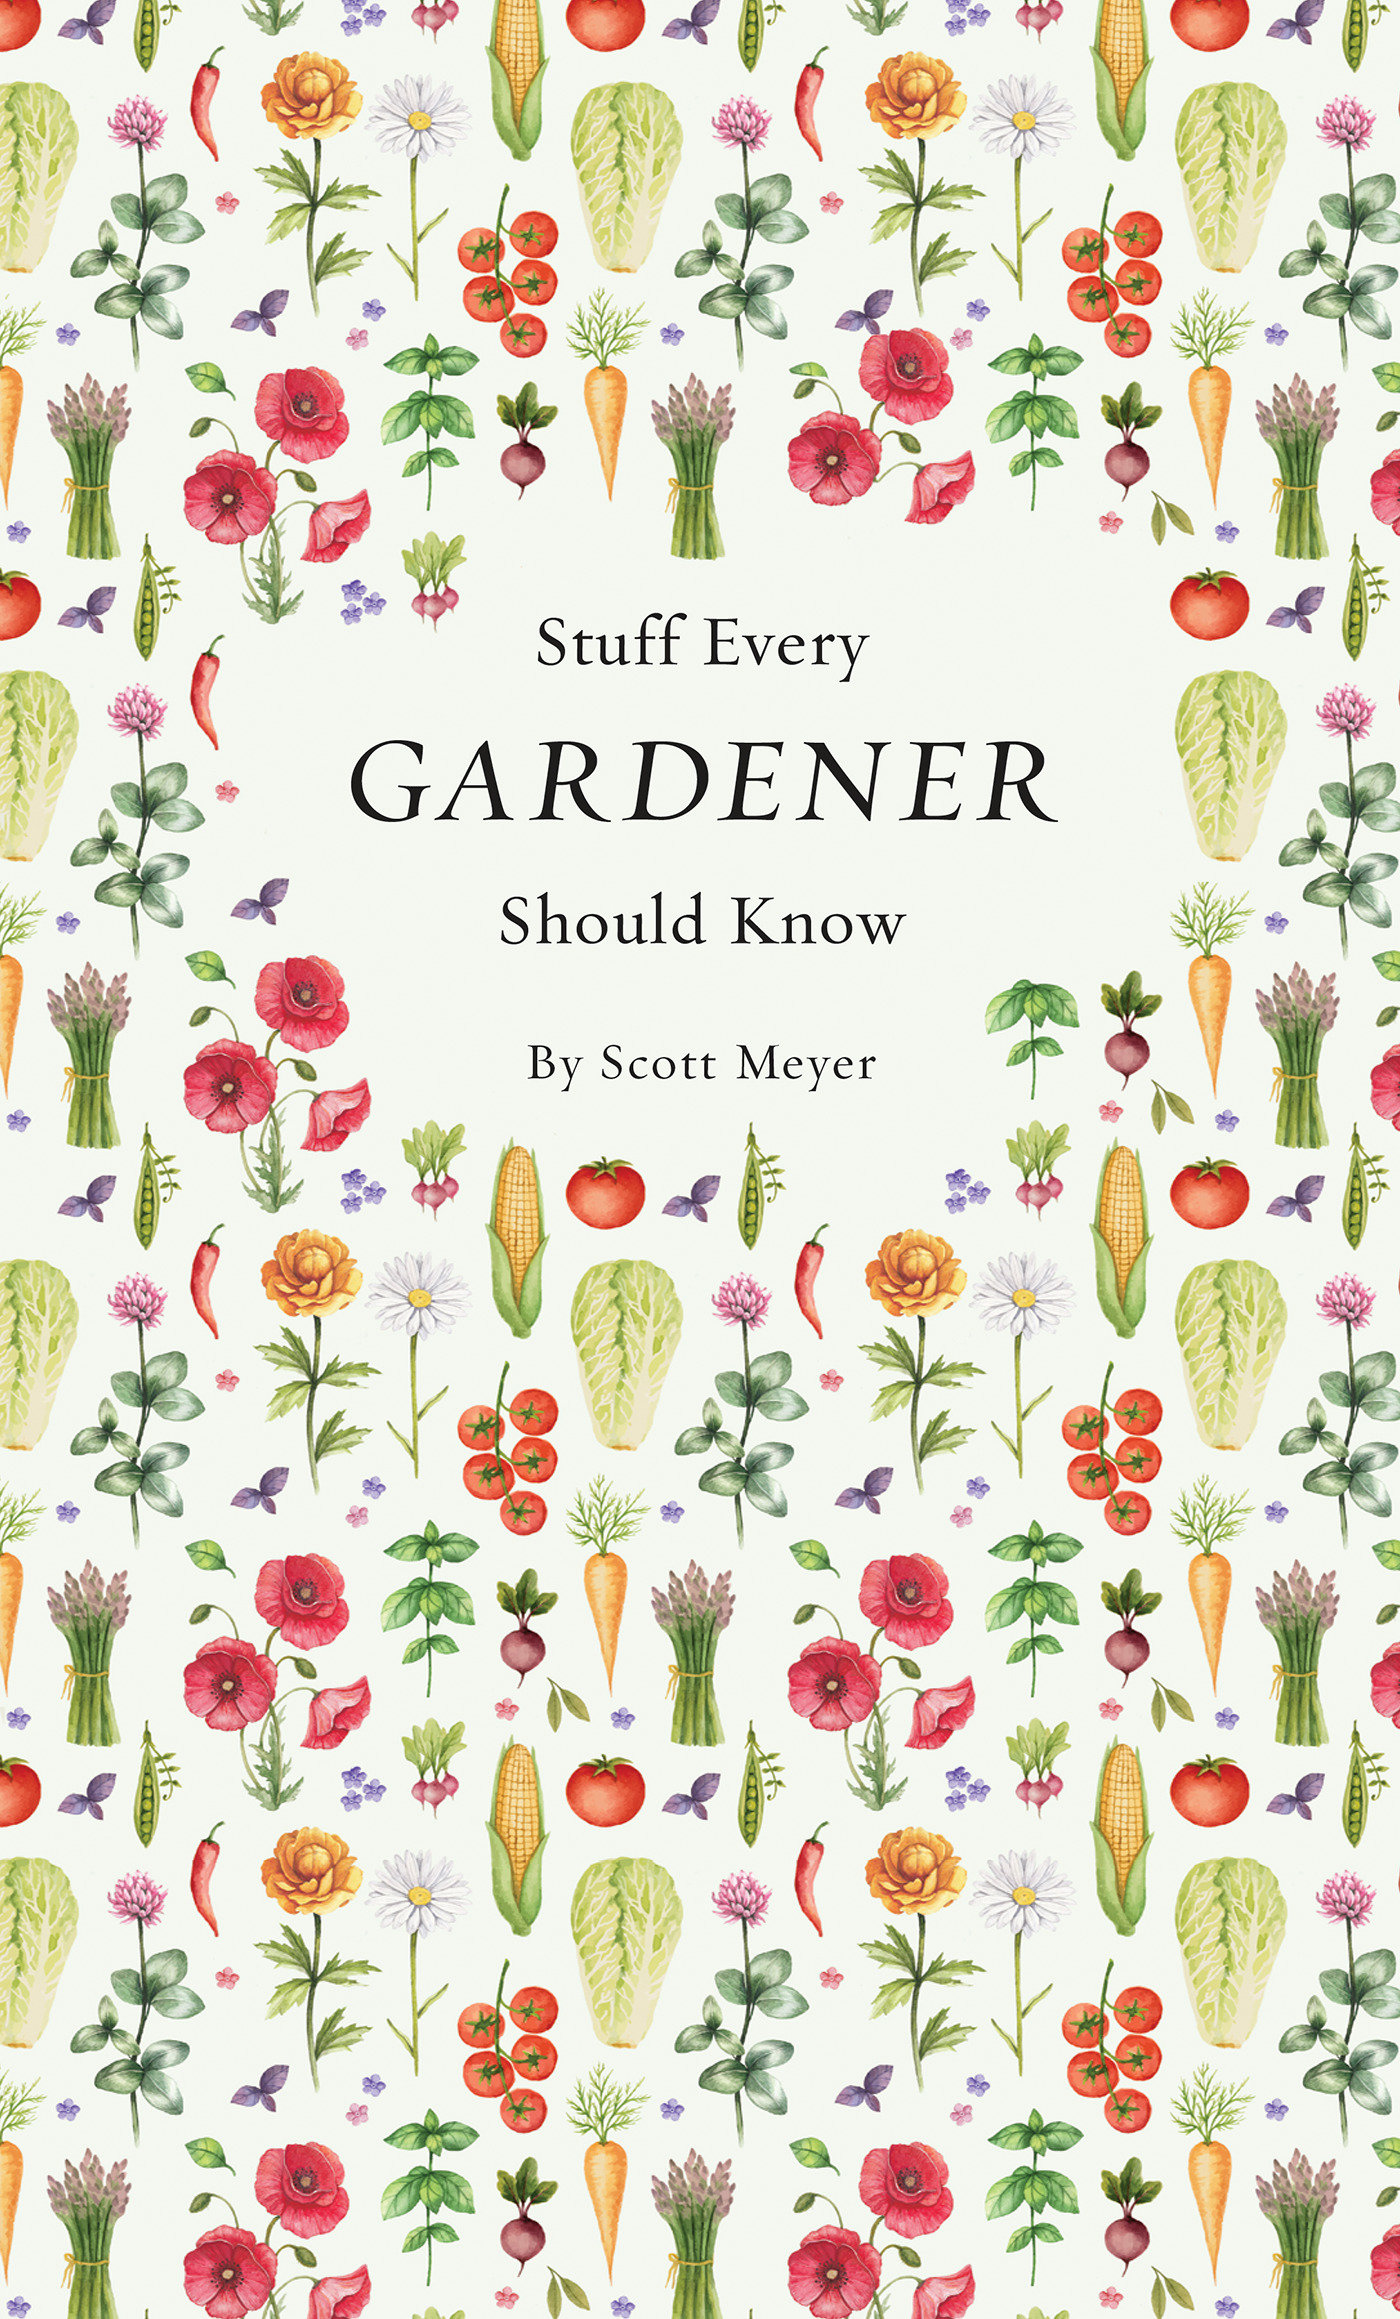 Stuff Every Gardener Should Know (Hardcover Book)